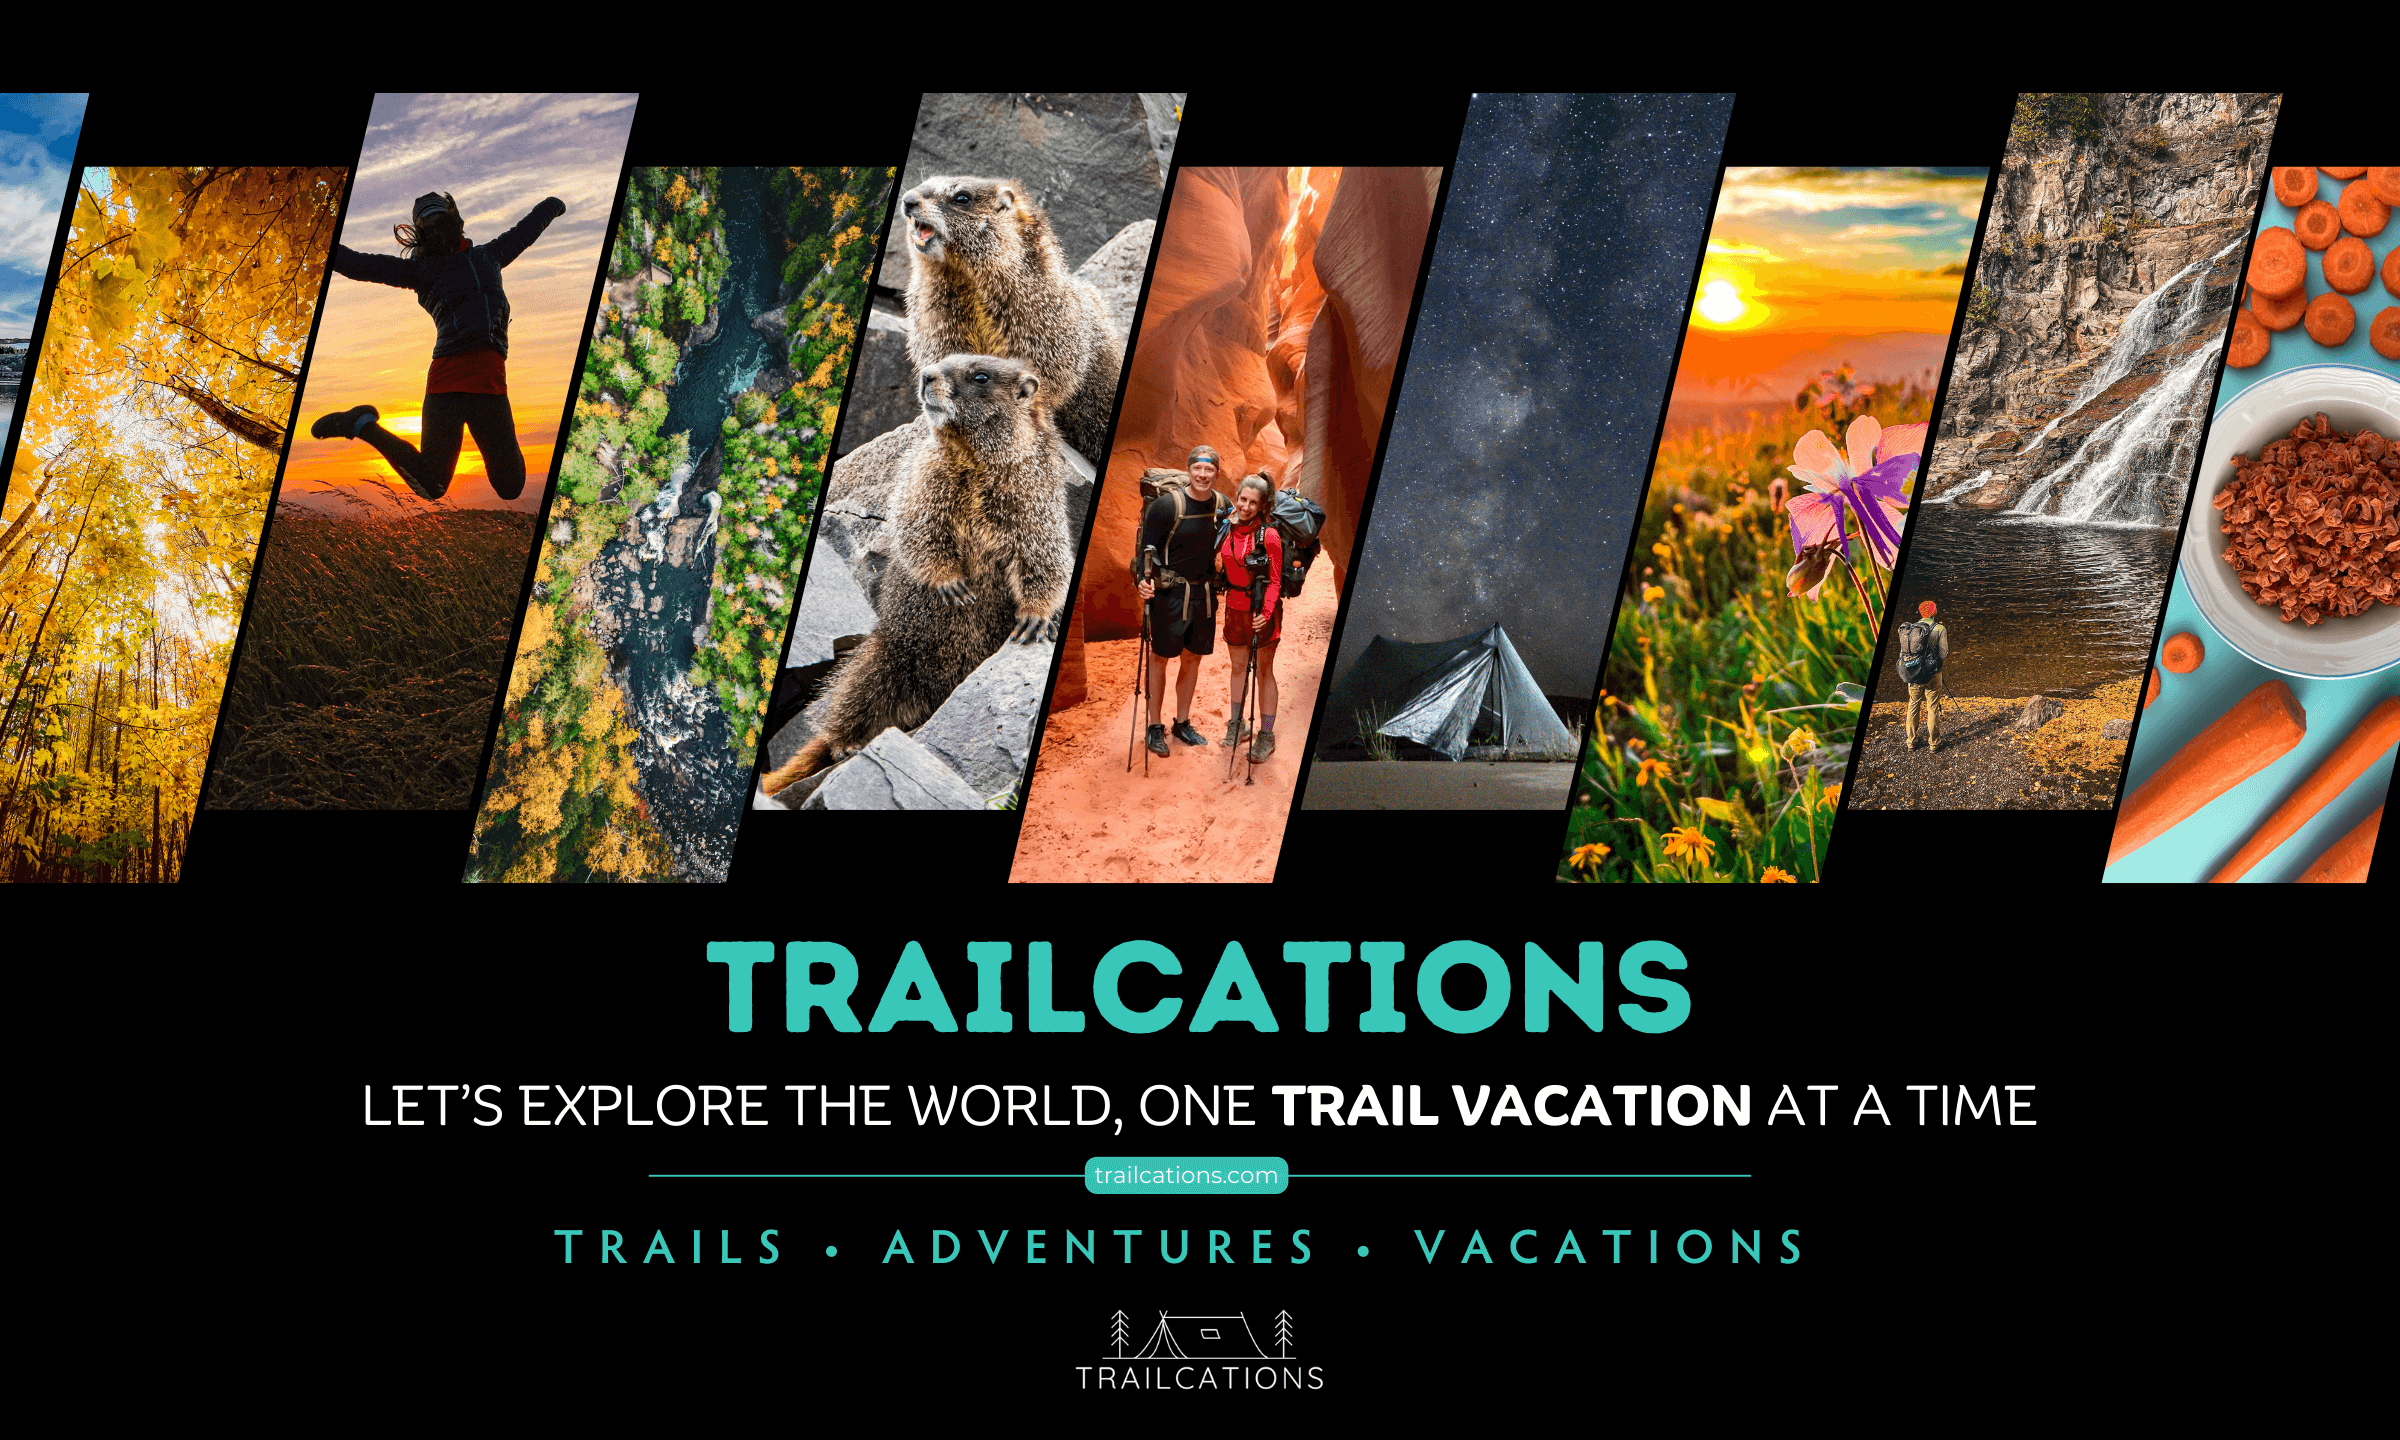 Trailcations Explore the world one trail vacation at a time. Trails Adventures Vacations. Dark Collage Trailcations home page image hiking biking paddling camping travel national parks.